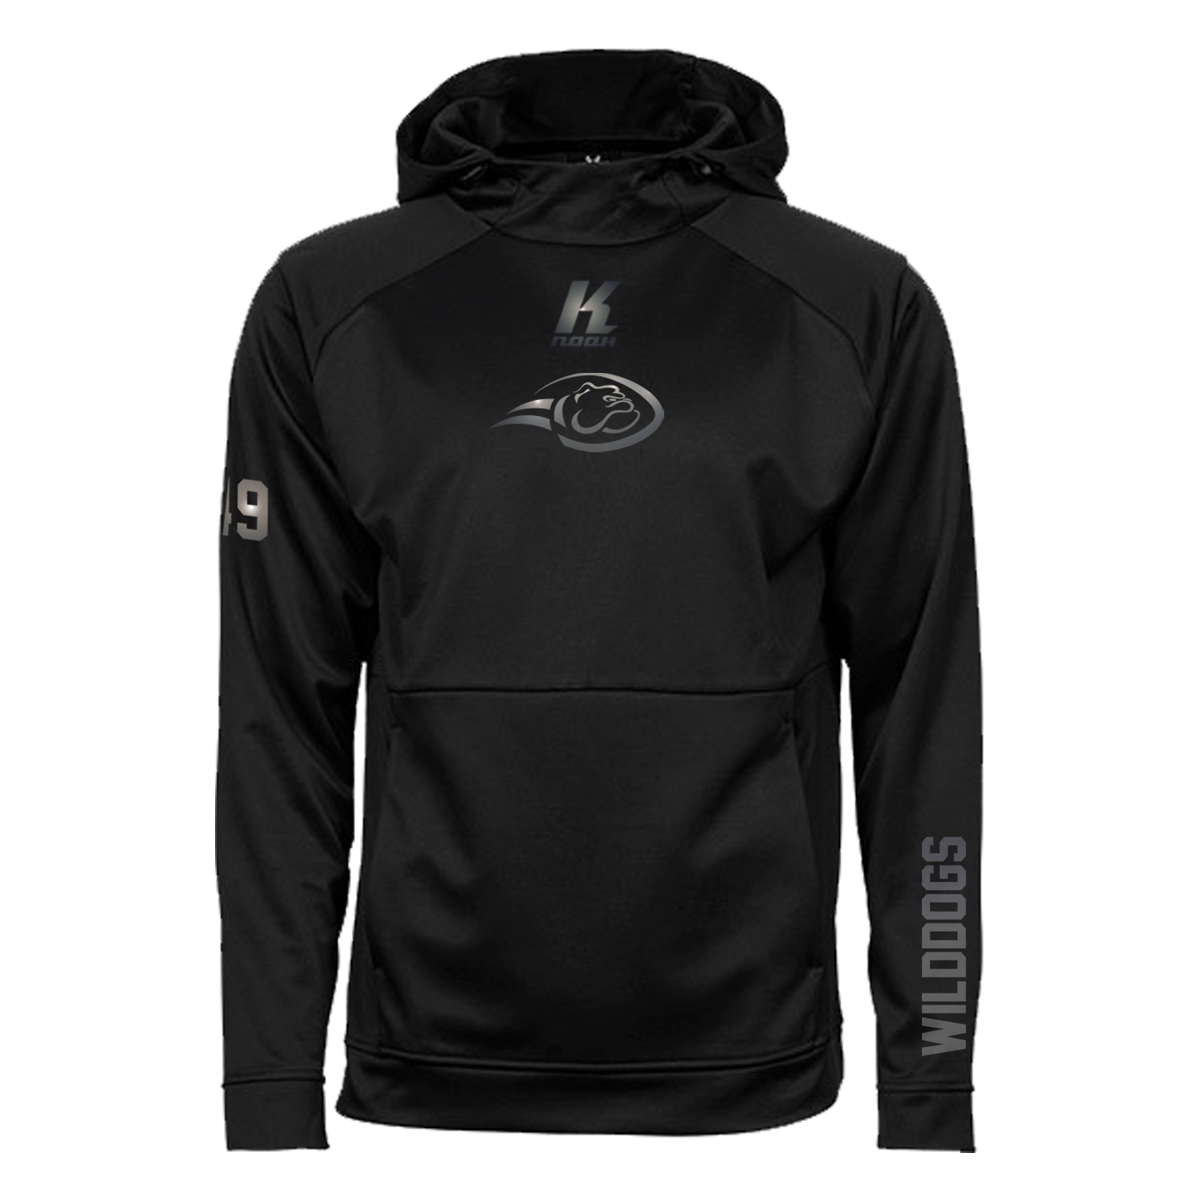 Wilddogs "Blackline" Performance Hoodie JH006 with Playernumber or Initials